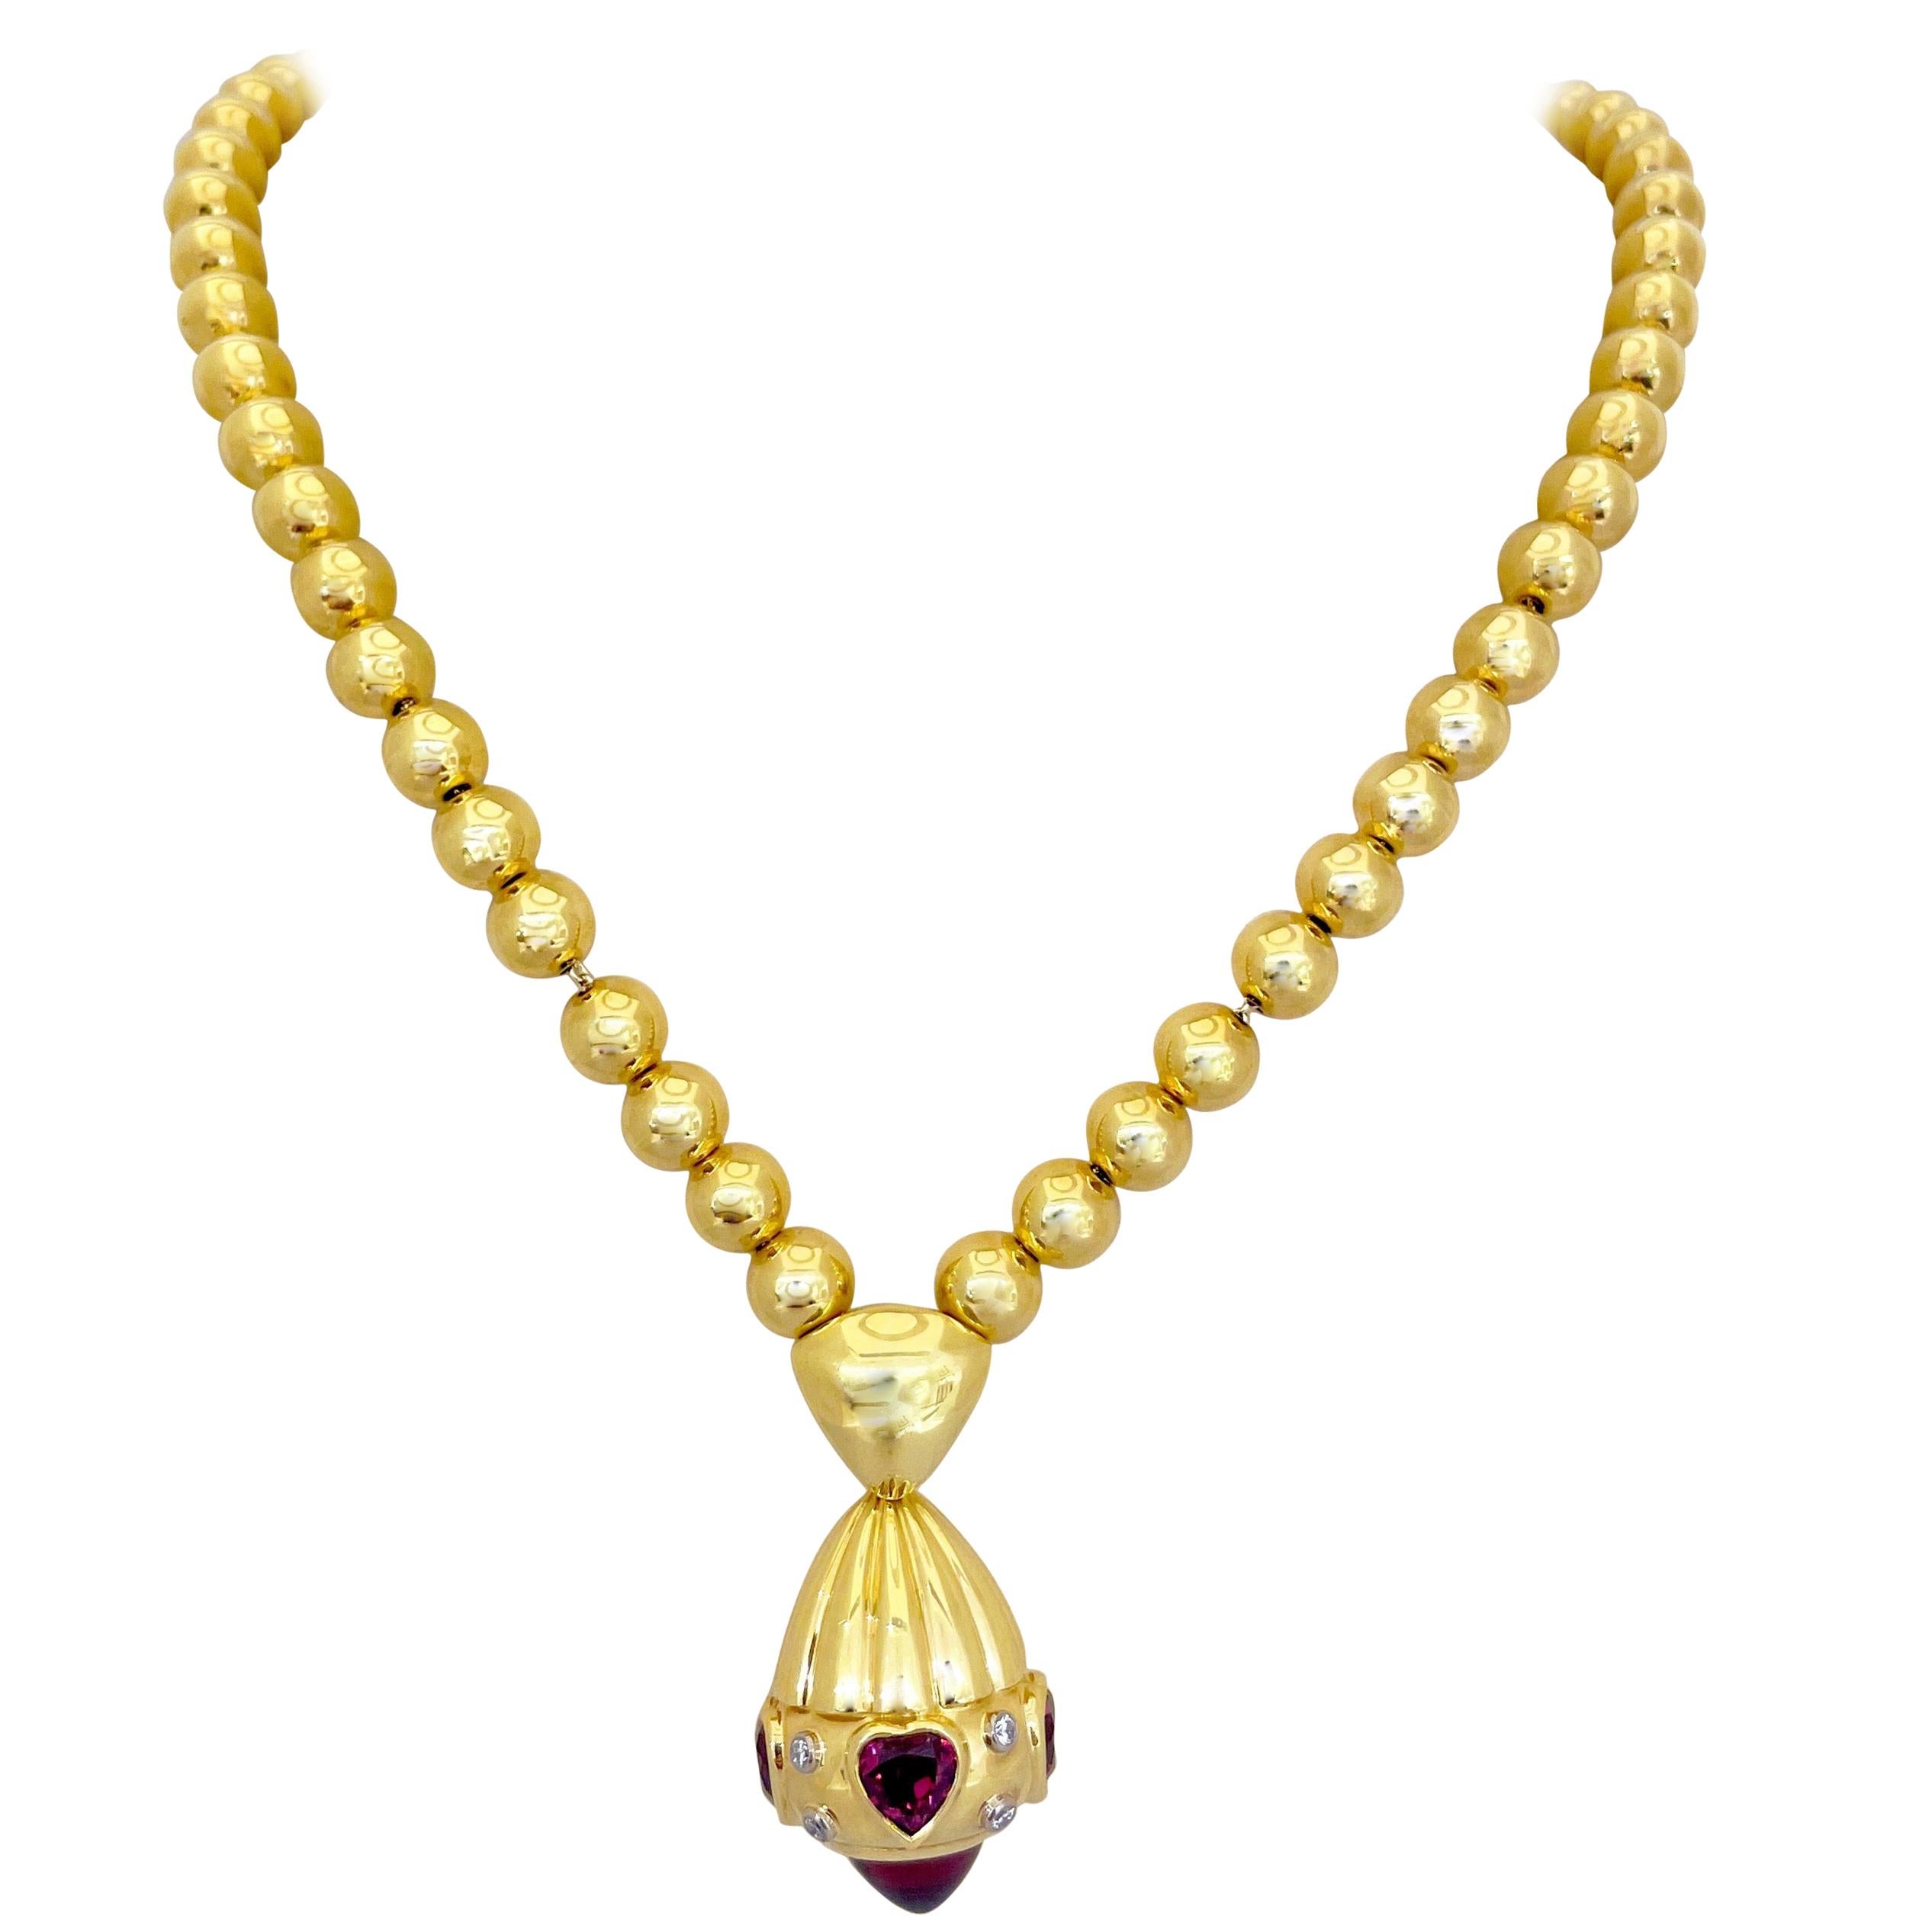 Rodney Rayner 18 Karat Gold Bead Necklace with Rhodolite Hearts and Diamonds